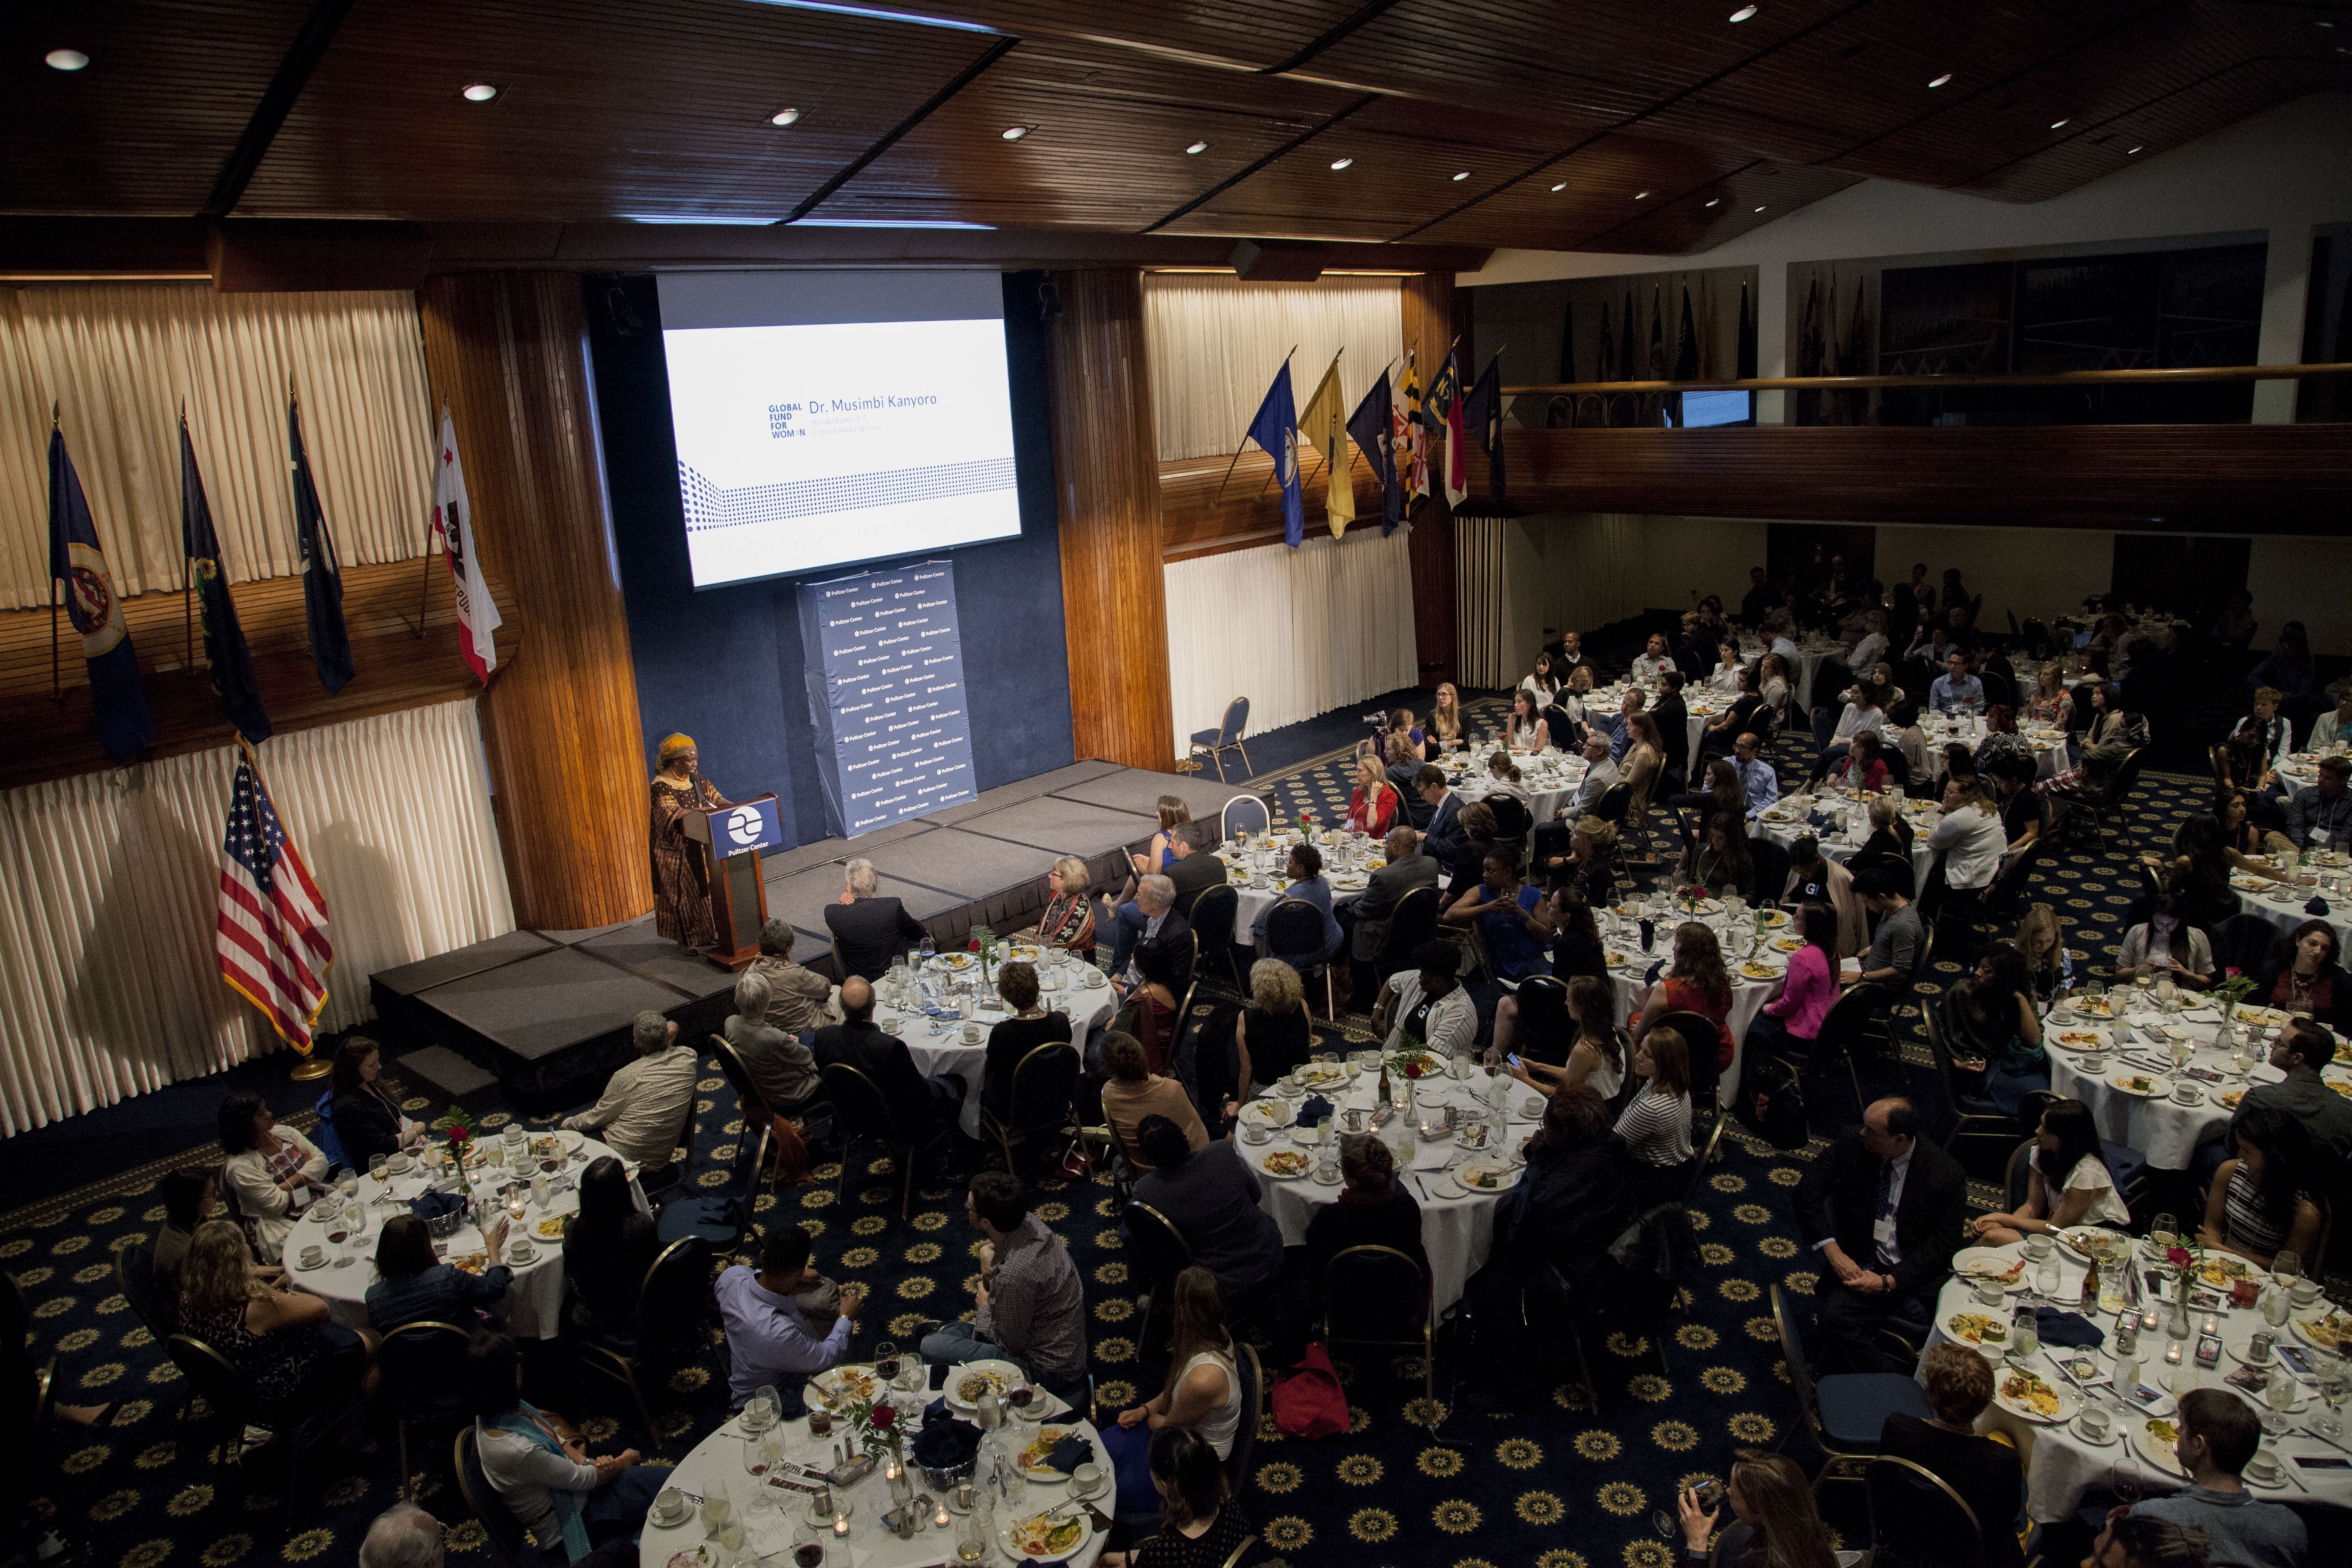 Keynote speaker Dr. Musimbi Kanyoro, President and CEO, Global Fund for Women, gives her remarks during the dinner program of the Pulitzer Center Gender Lens Conference at the National Press Club in Washington, D.C. Image by Jin Ding. United States, 2017.